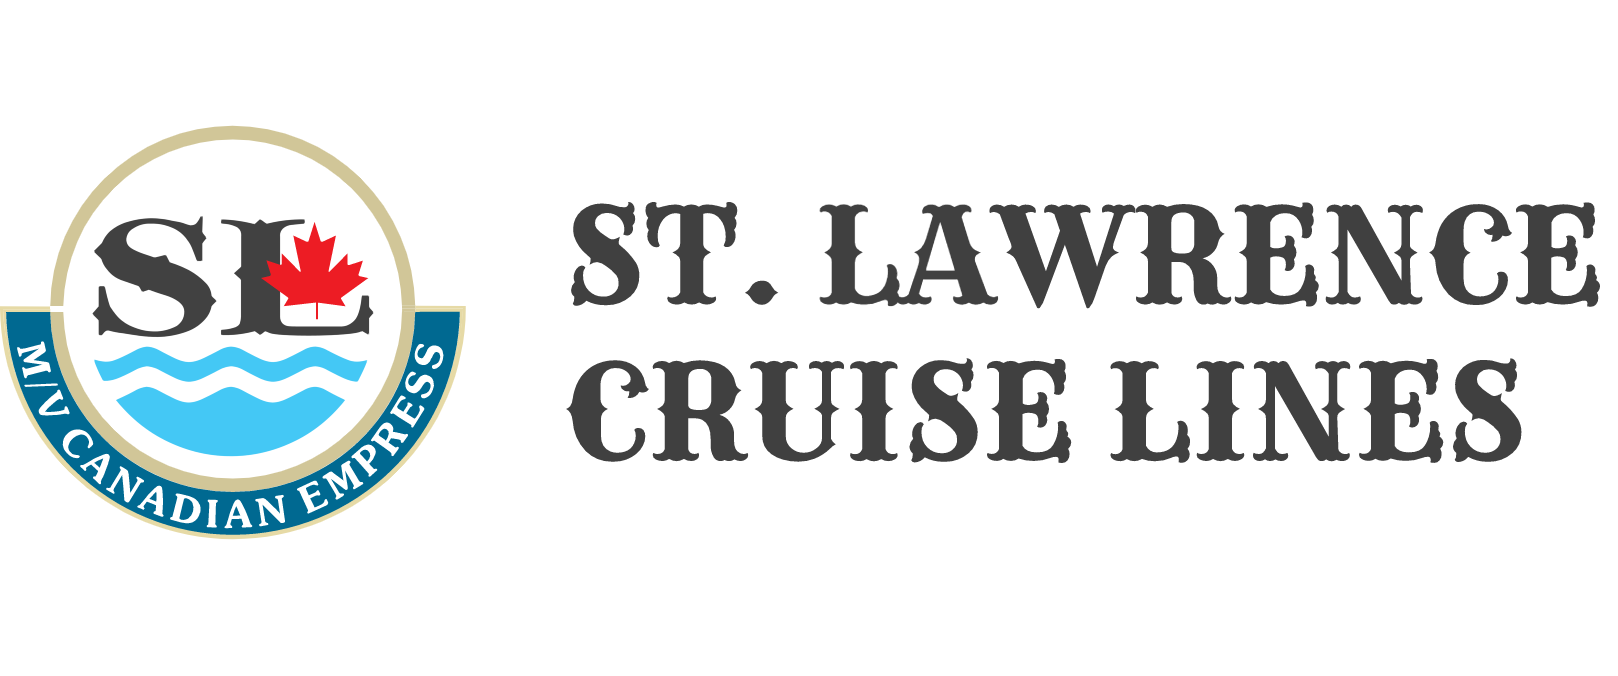 st lawrence cruise lines great lakes cruises